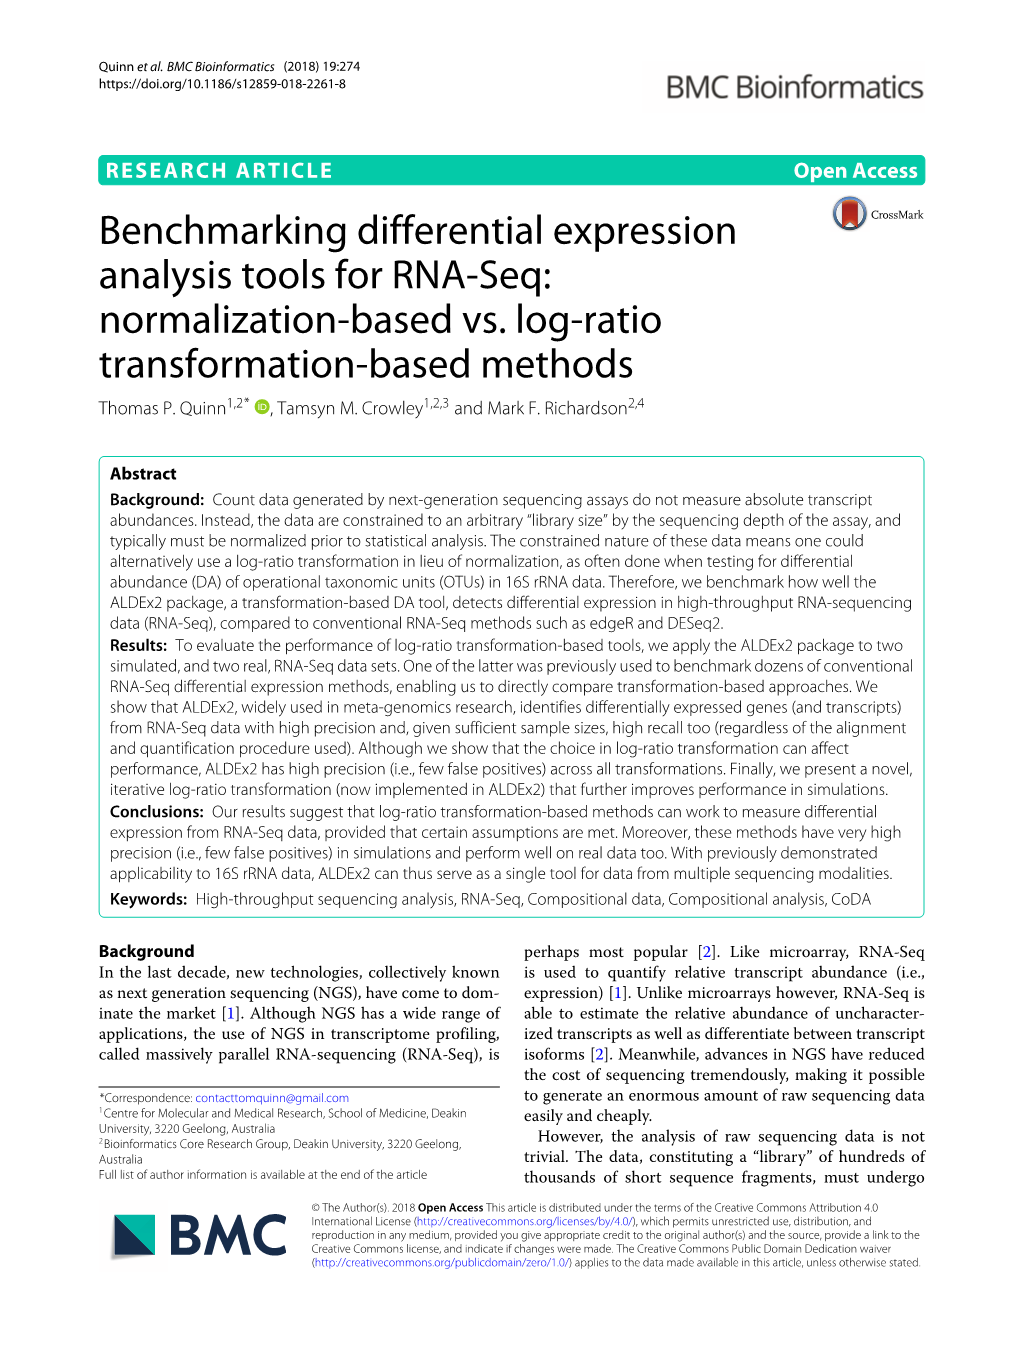 Benchmarking Differential Expression Analysis Tools for RNA-Seq: Normalization-Based Vs. Log-Ratio Transformation-Based Methods Thomas P